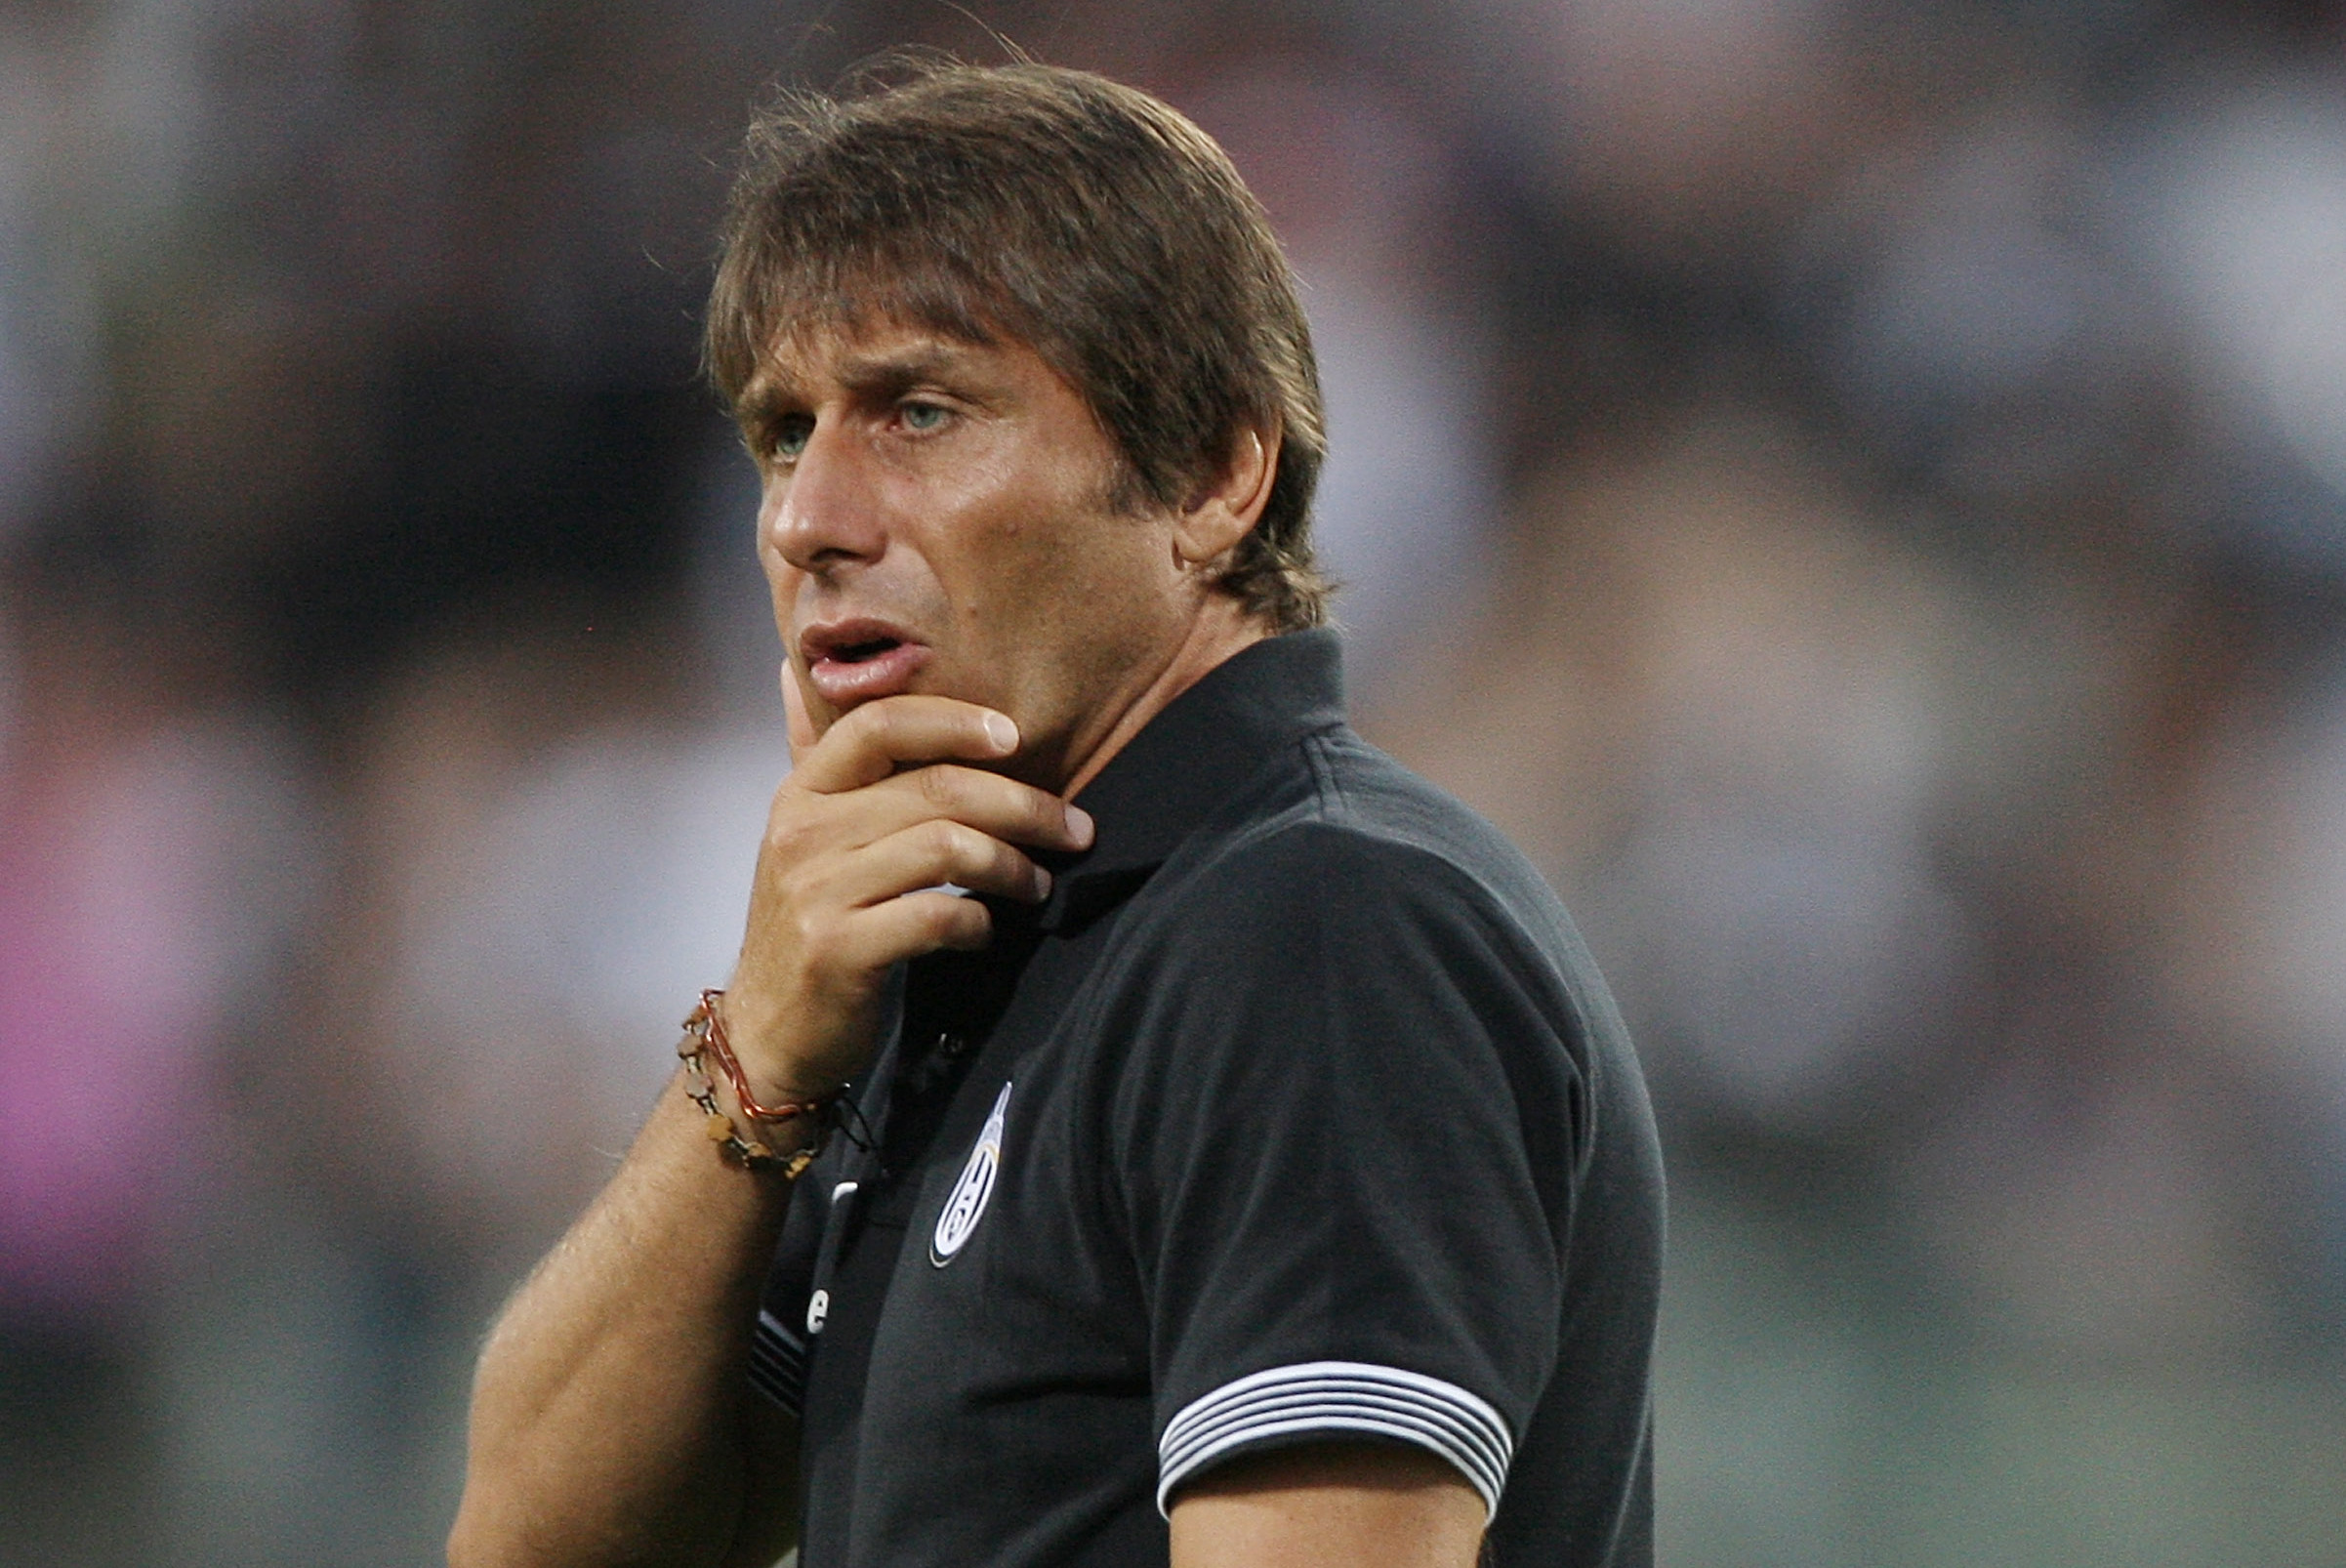 Juventus' Antonio Conte gets 10-month ban in connection with match-fixing, Juventus